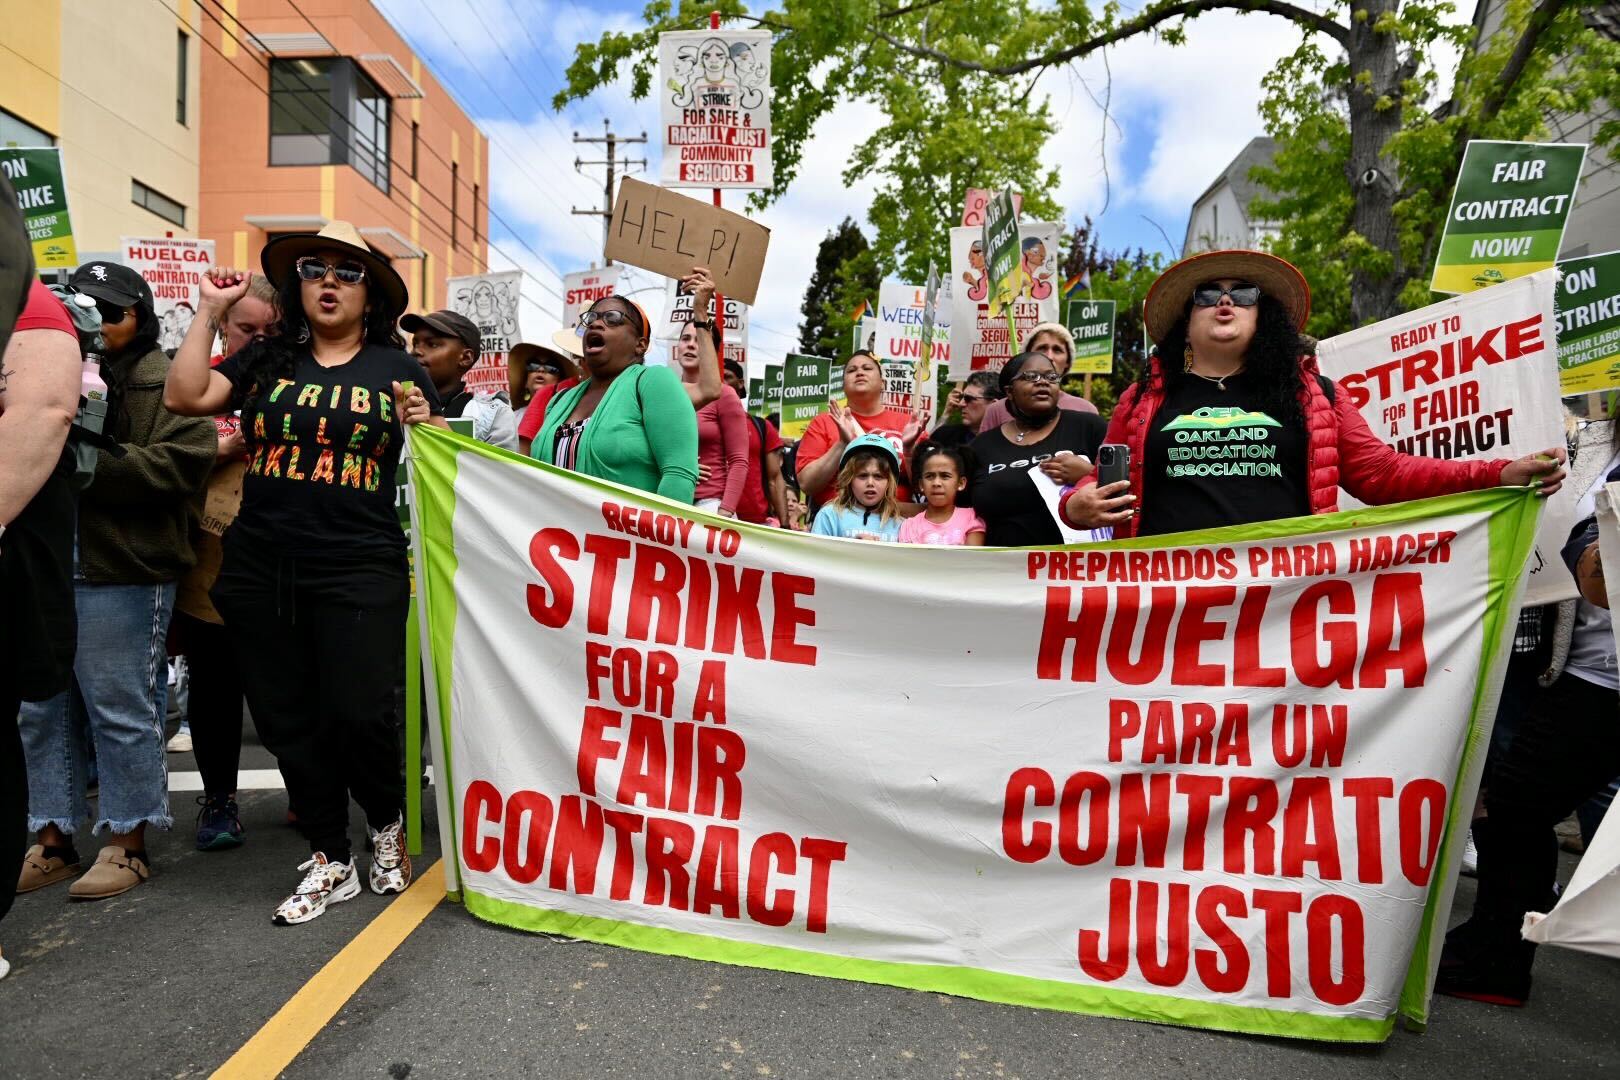 a group of people which appears to be multi-ethnic in composition walks down a street carrying a large banner reading 'ready to strike for a fair contract' in both English and Spanish